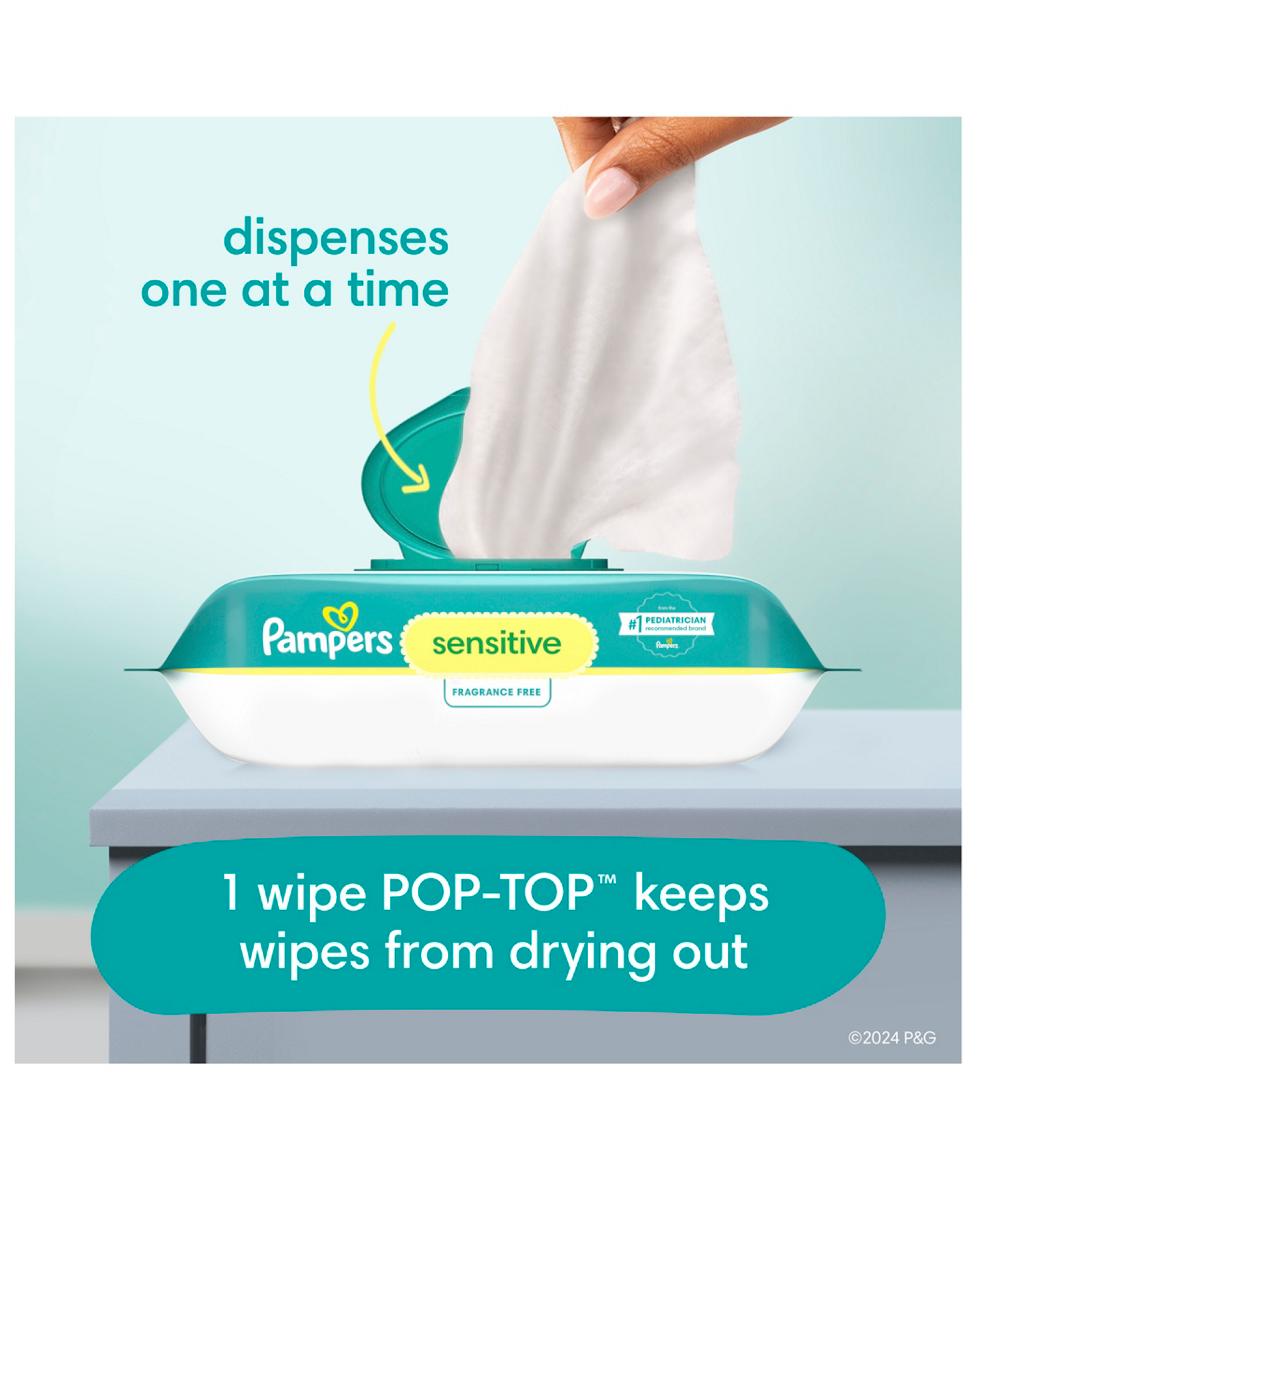 Pampers Sensitive Skin Baby Wipes; image 9 of 10